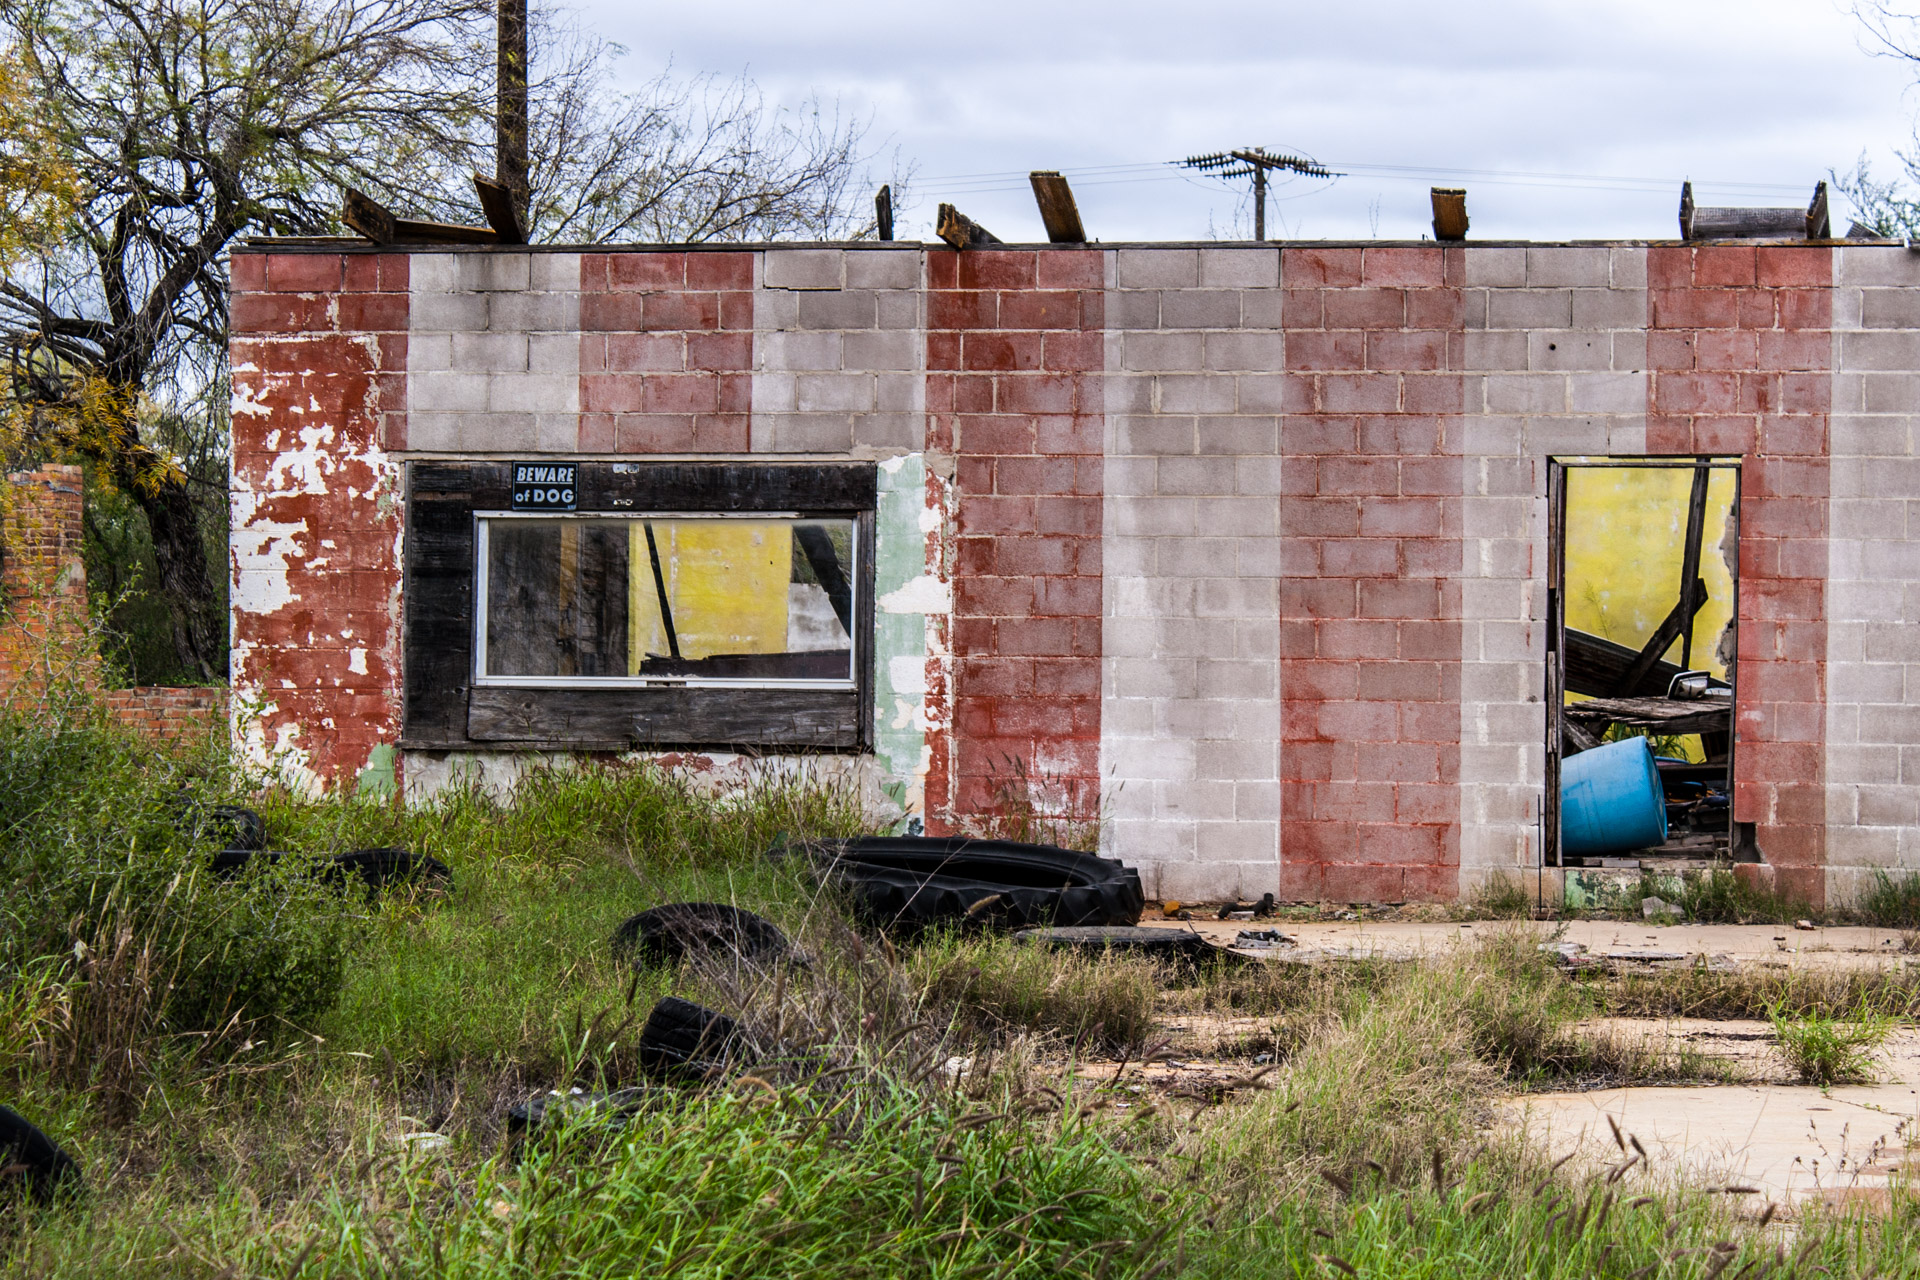 Pearsall, Texas - A Ruin, A Trailer, And Some Tires (ruin left)